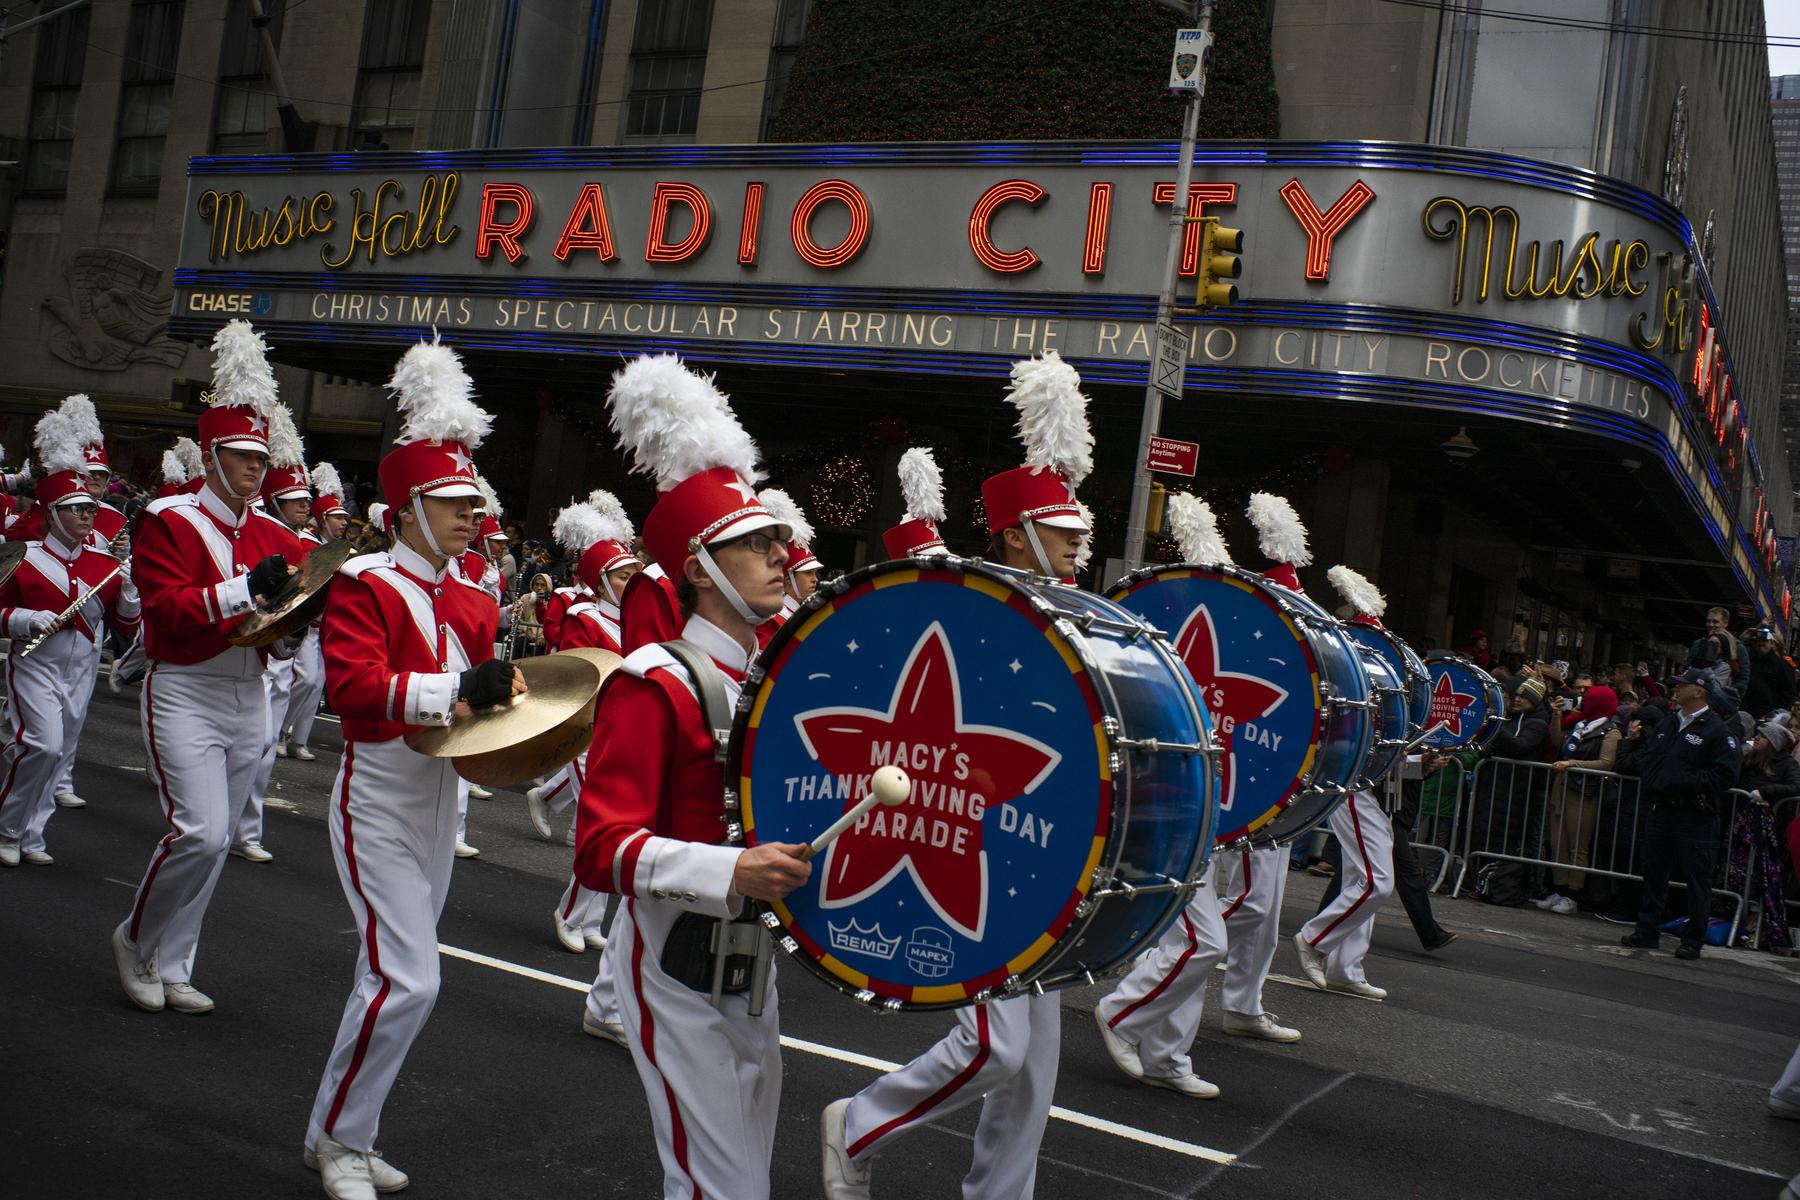 FILE - Revelers makes their way down the Avenue of the Americas in front of Radio City Music Hall during the Macy's Thanksgiving Day Parade in New York on Nov. 28, 2019. This year’s parade will snap back to form after bowing to pandemic restrictions last year. It will feature 15 giant character balloons, 28 floats, 36 novelty and heritage inflatables, more than 800 clowns, 10 marching bands and nine performance groups and, of course, Santa Claus (AP Photo/Eduardo Munoz Alvarez, File)